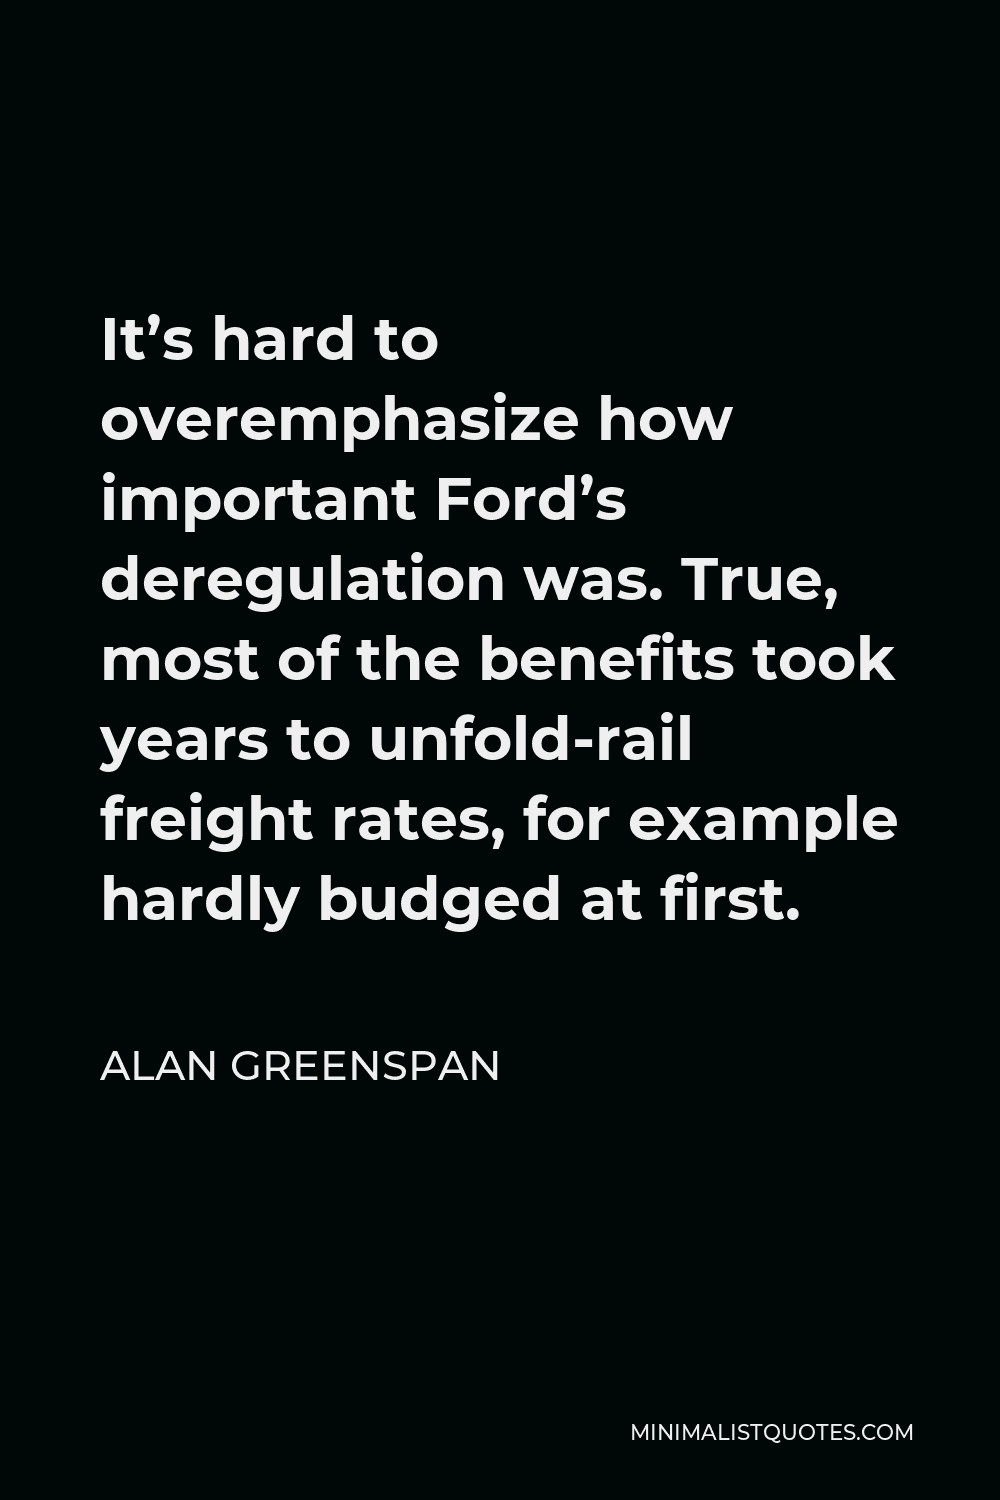 Alan Greenspan Quote - It’s hard to overemphasize how important Ford’s deregulation was. True, most of the benefits took years to unfold-rail freight rates, for example hardly budged at first.